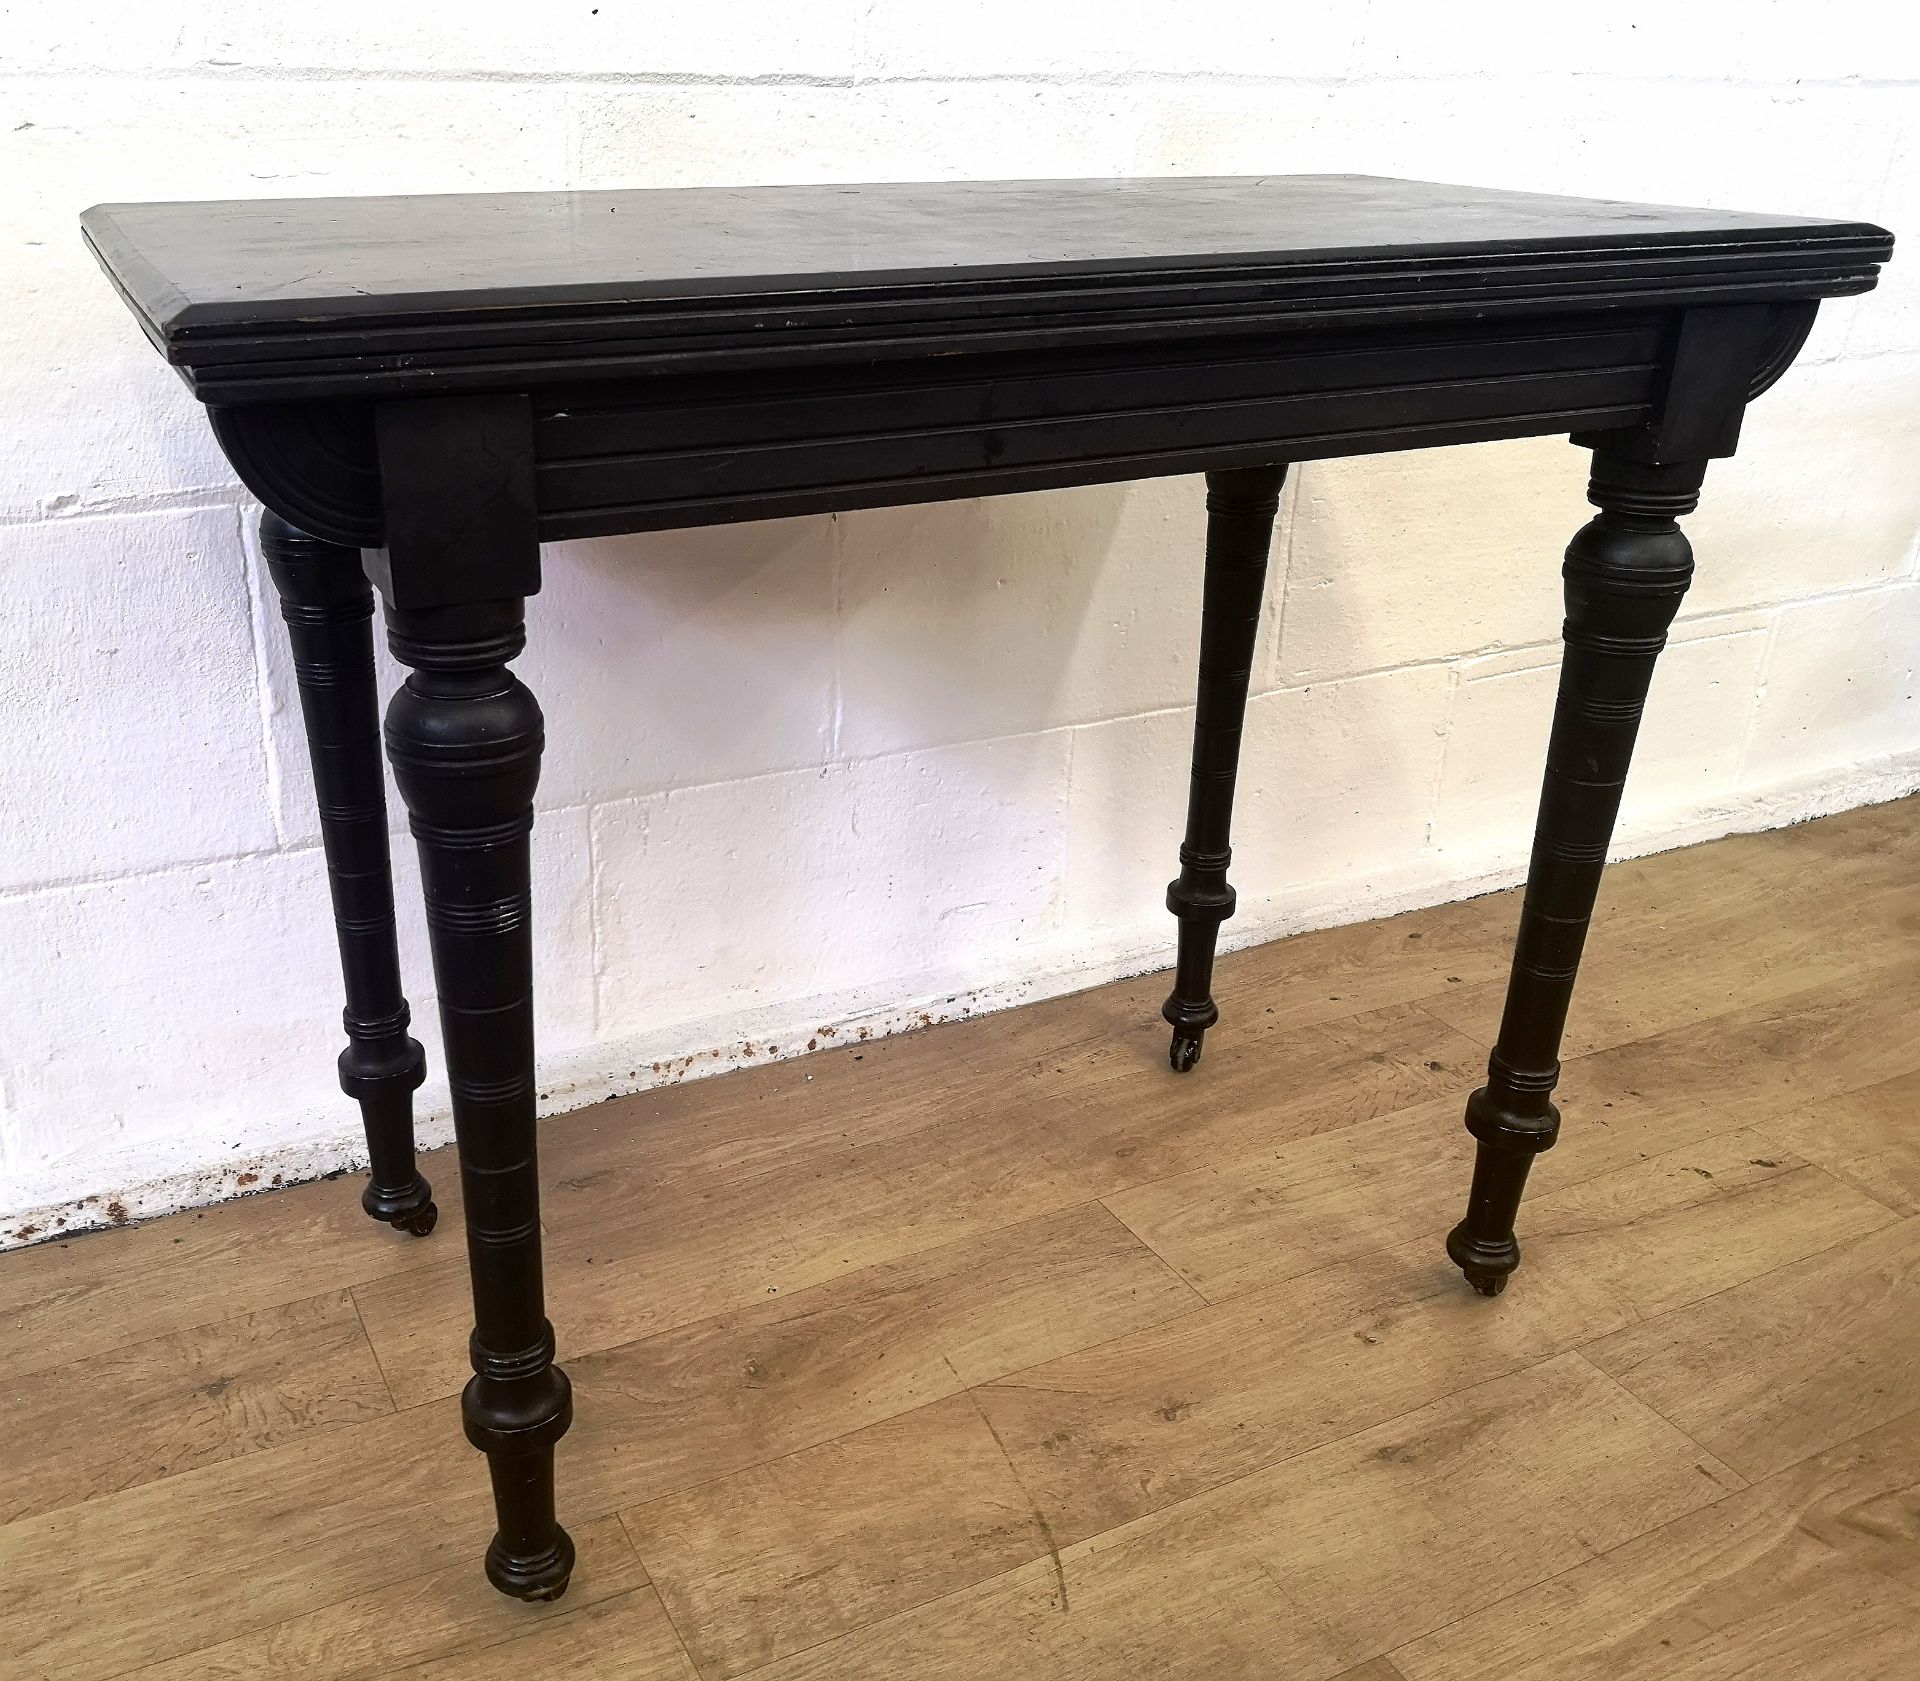 Black painted games table